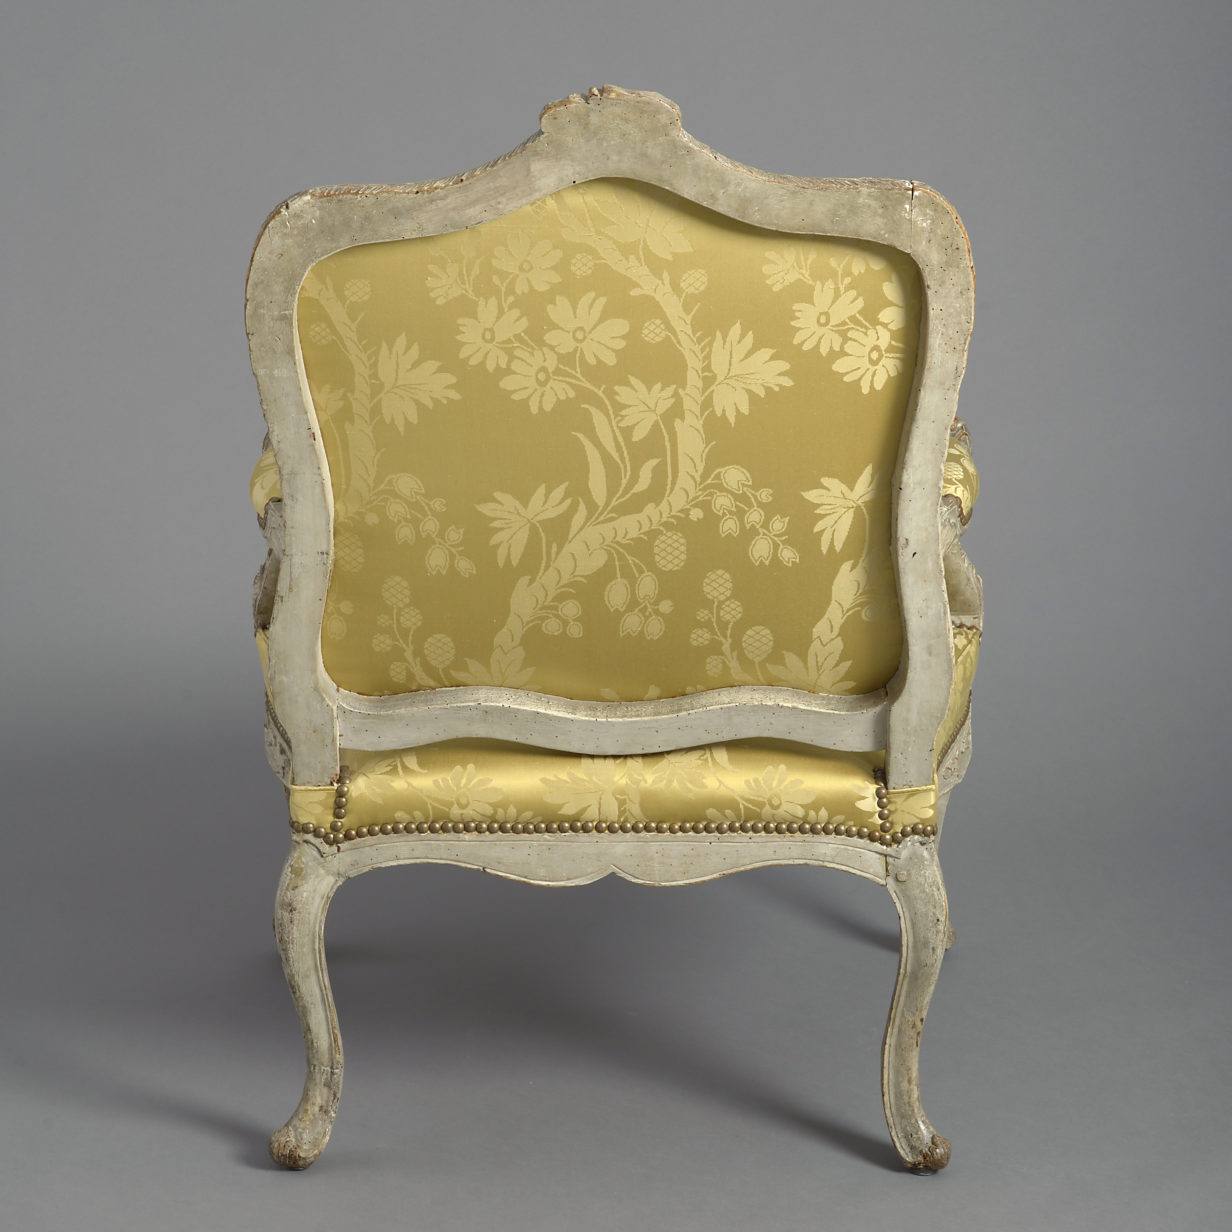 Large 18th Century Regence Period Painted Fauteuil or Open Armchair